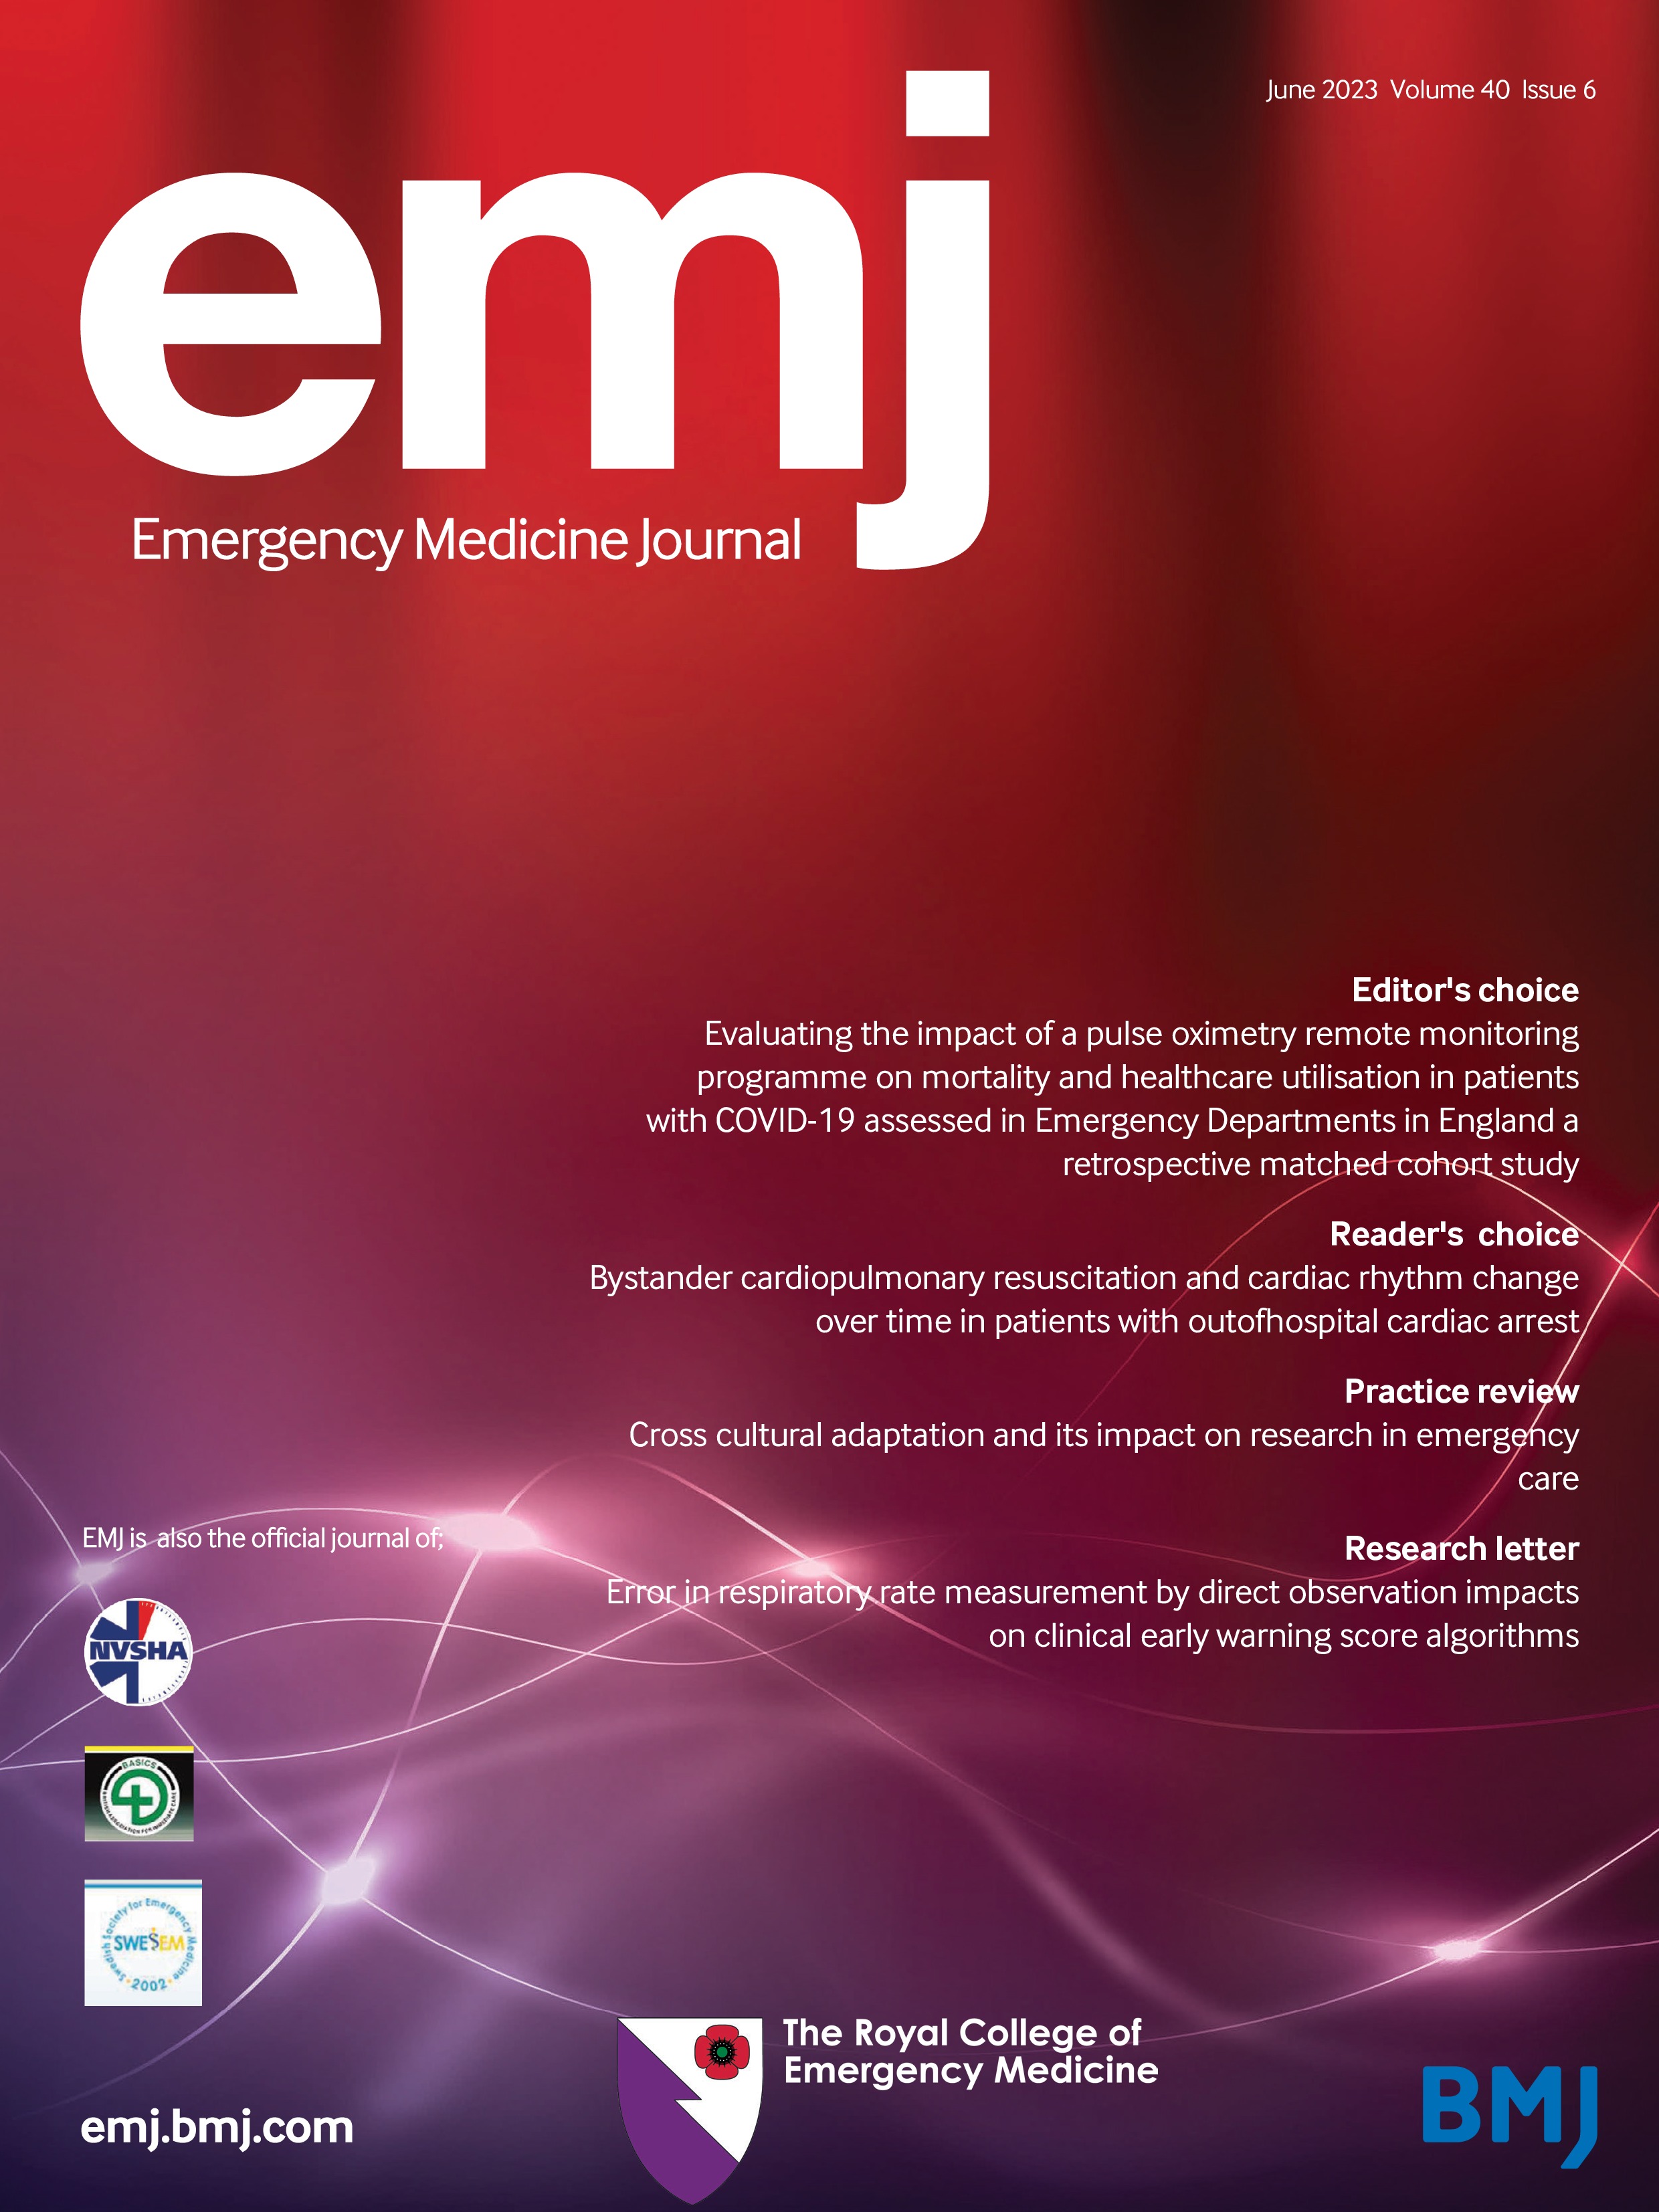 Association between the number of prehospital defibrillation attempts and a sustained return of spontaneous circulation: a retrospective, multicentre, registry-based study